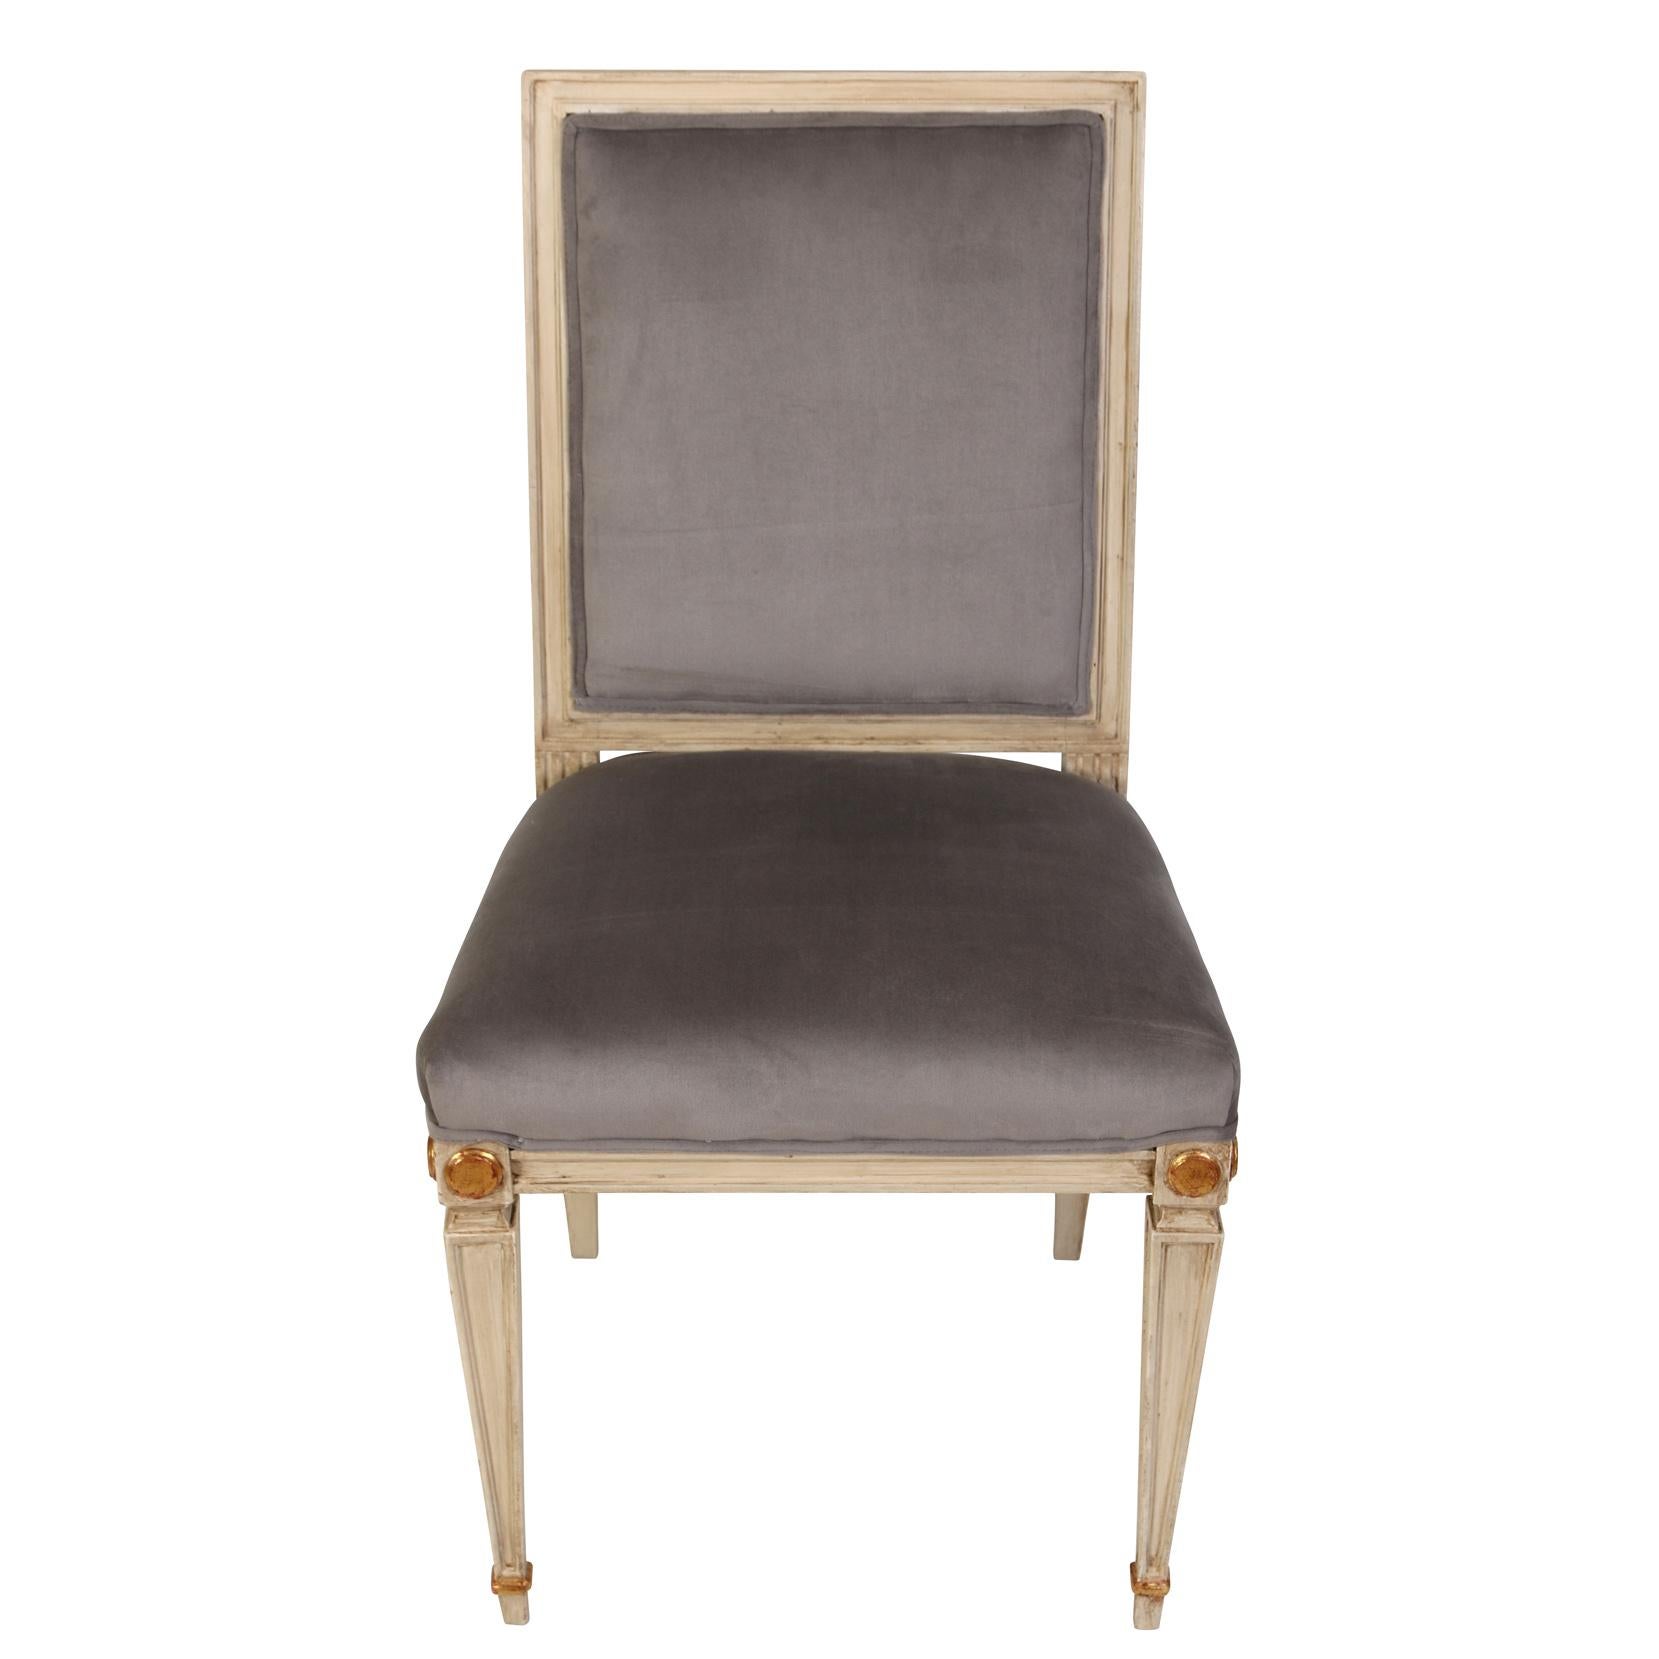 We love the understated elegance of these Louis XVI style dining chairs. Painted in a light gray finish, the chairs have a squared back and seat. The legs are squared and tapered with brass sabots and the frame features subtle gold leaf accents.